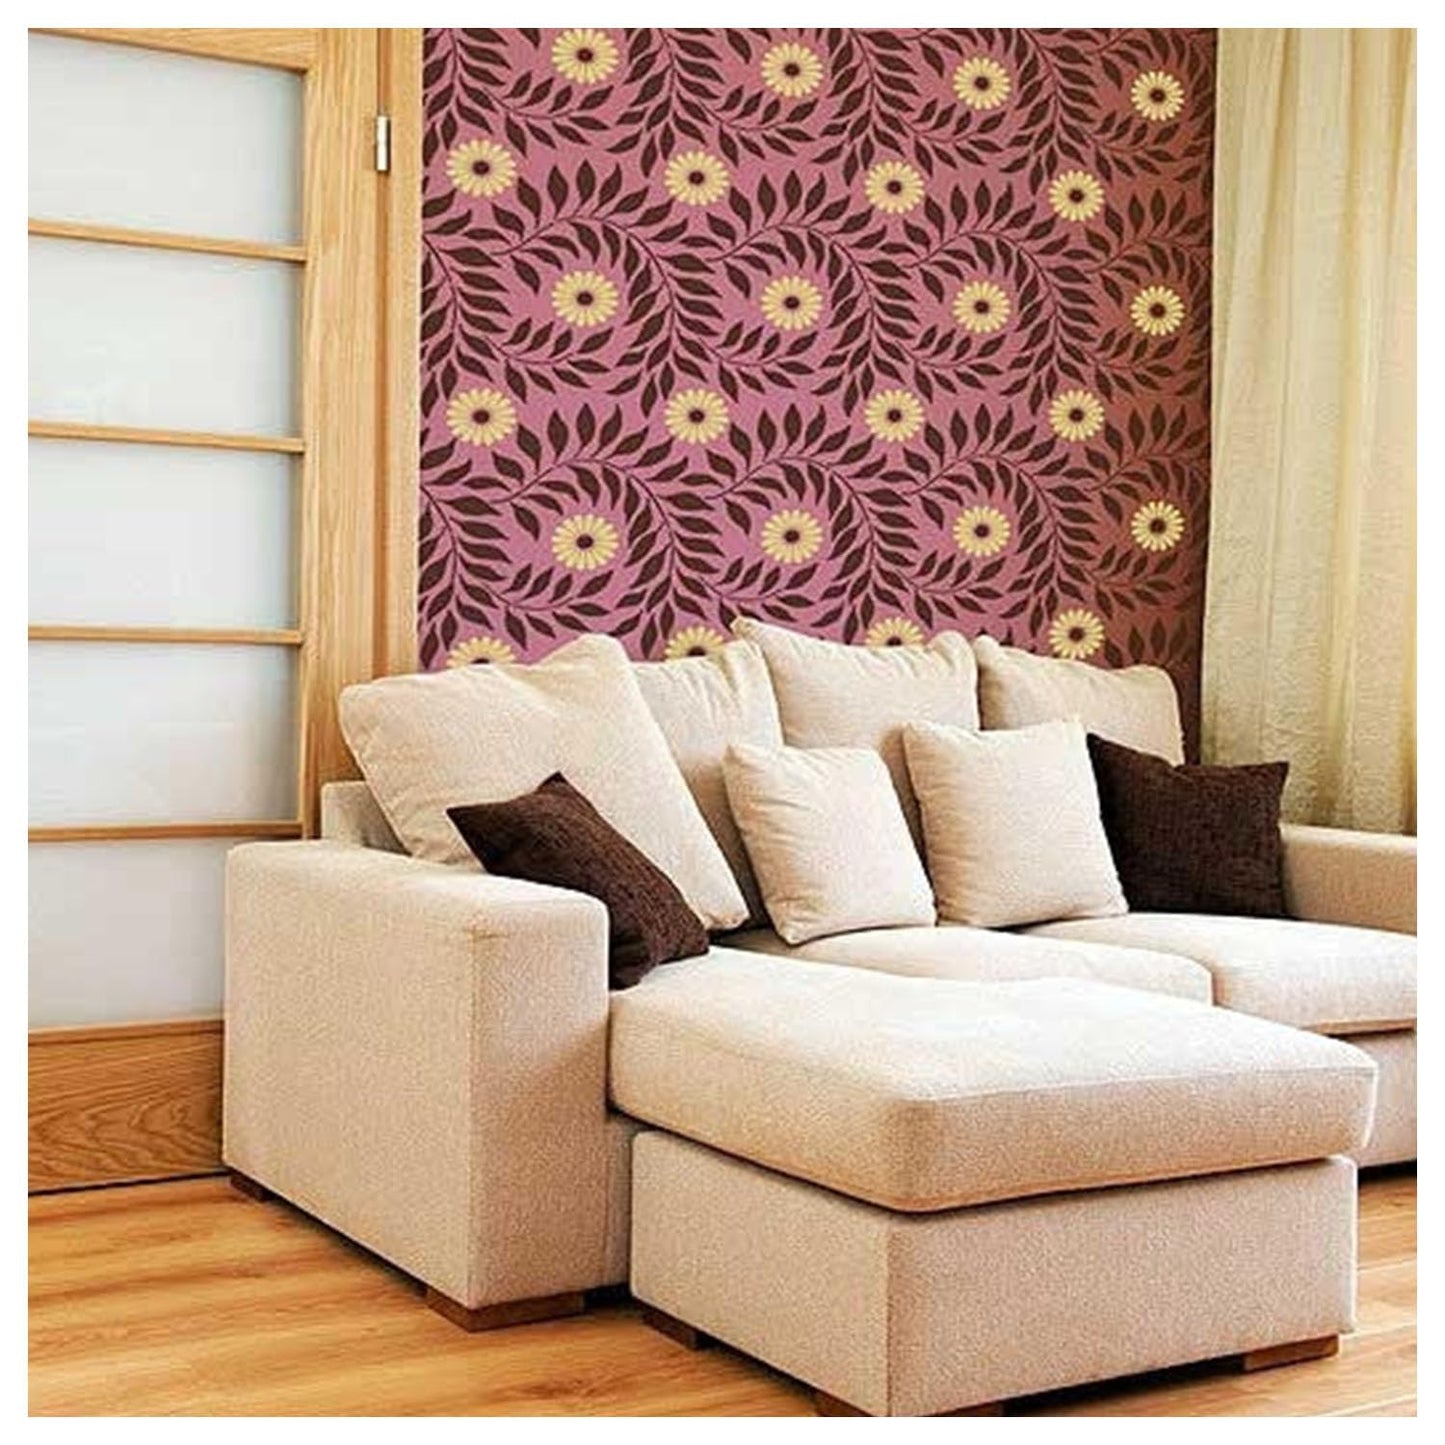 Latest Large Indian Sunflower Wall Design Stencil -Pack of 1, Sheet Size 36 x 48 inch/Design Size 34 x 43 inch.